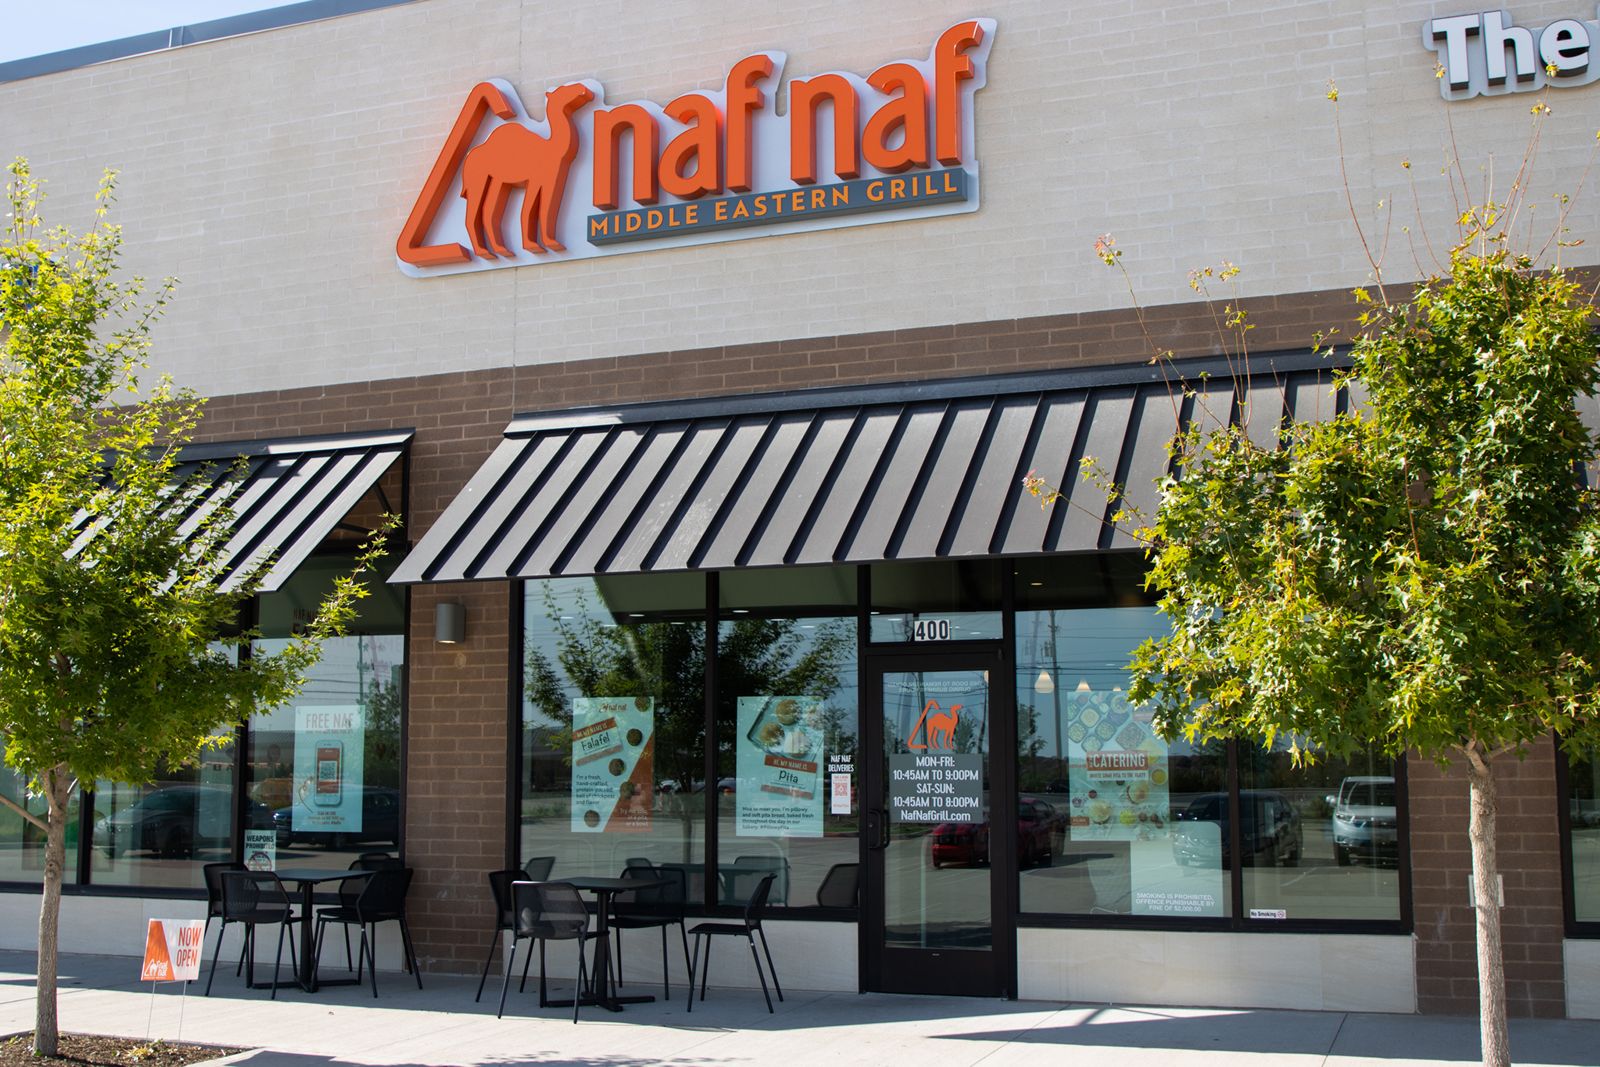 Naf Naf Middle Eastern Grill Celebrates Opening First Texas Restaurant in Frisco